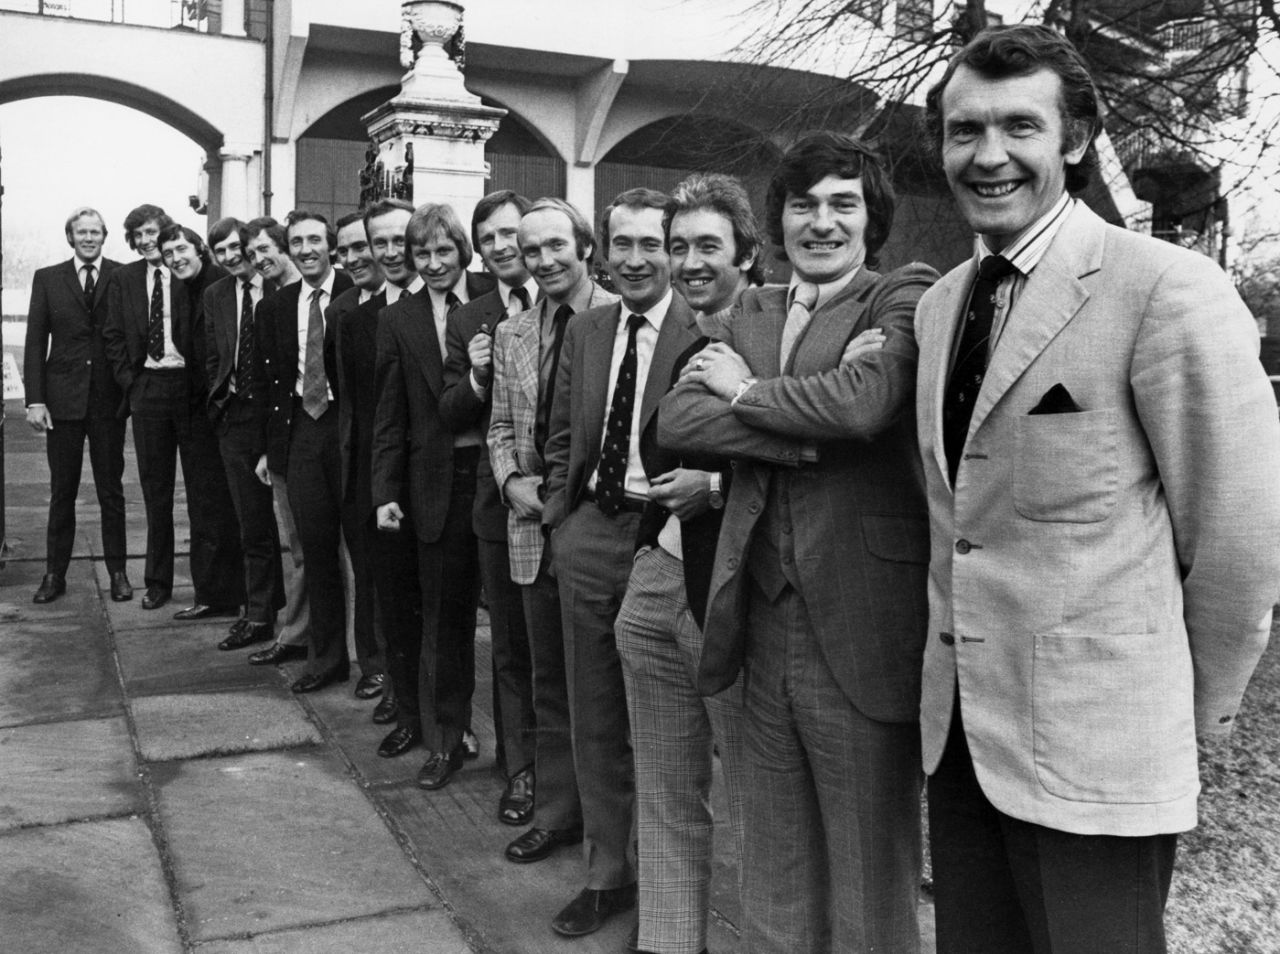 The England players pose for a photo outside Lord's. From left: Tony Greig, Bob Willis, Mike Hendrick, Chris Old, Pat Pocock, Geoff Arnold, John Jameson, Derek Underwood, Frank Hayes, Dennis Amiss, Jack Birkenshaw, Keith Fletcher, Bob Taylor, Alan Knott and Mike Denness, December 31, 1973